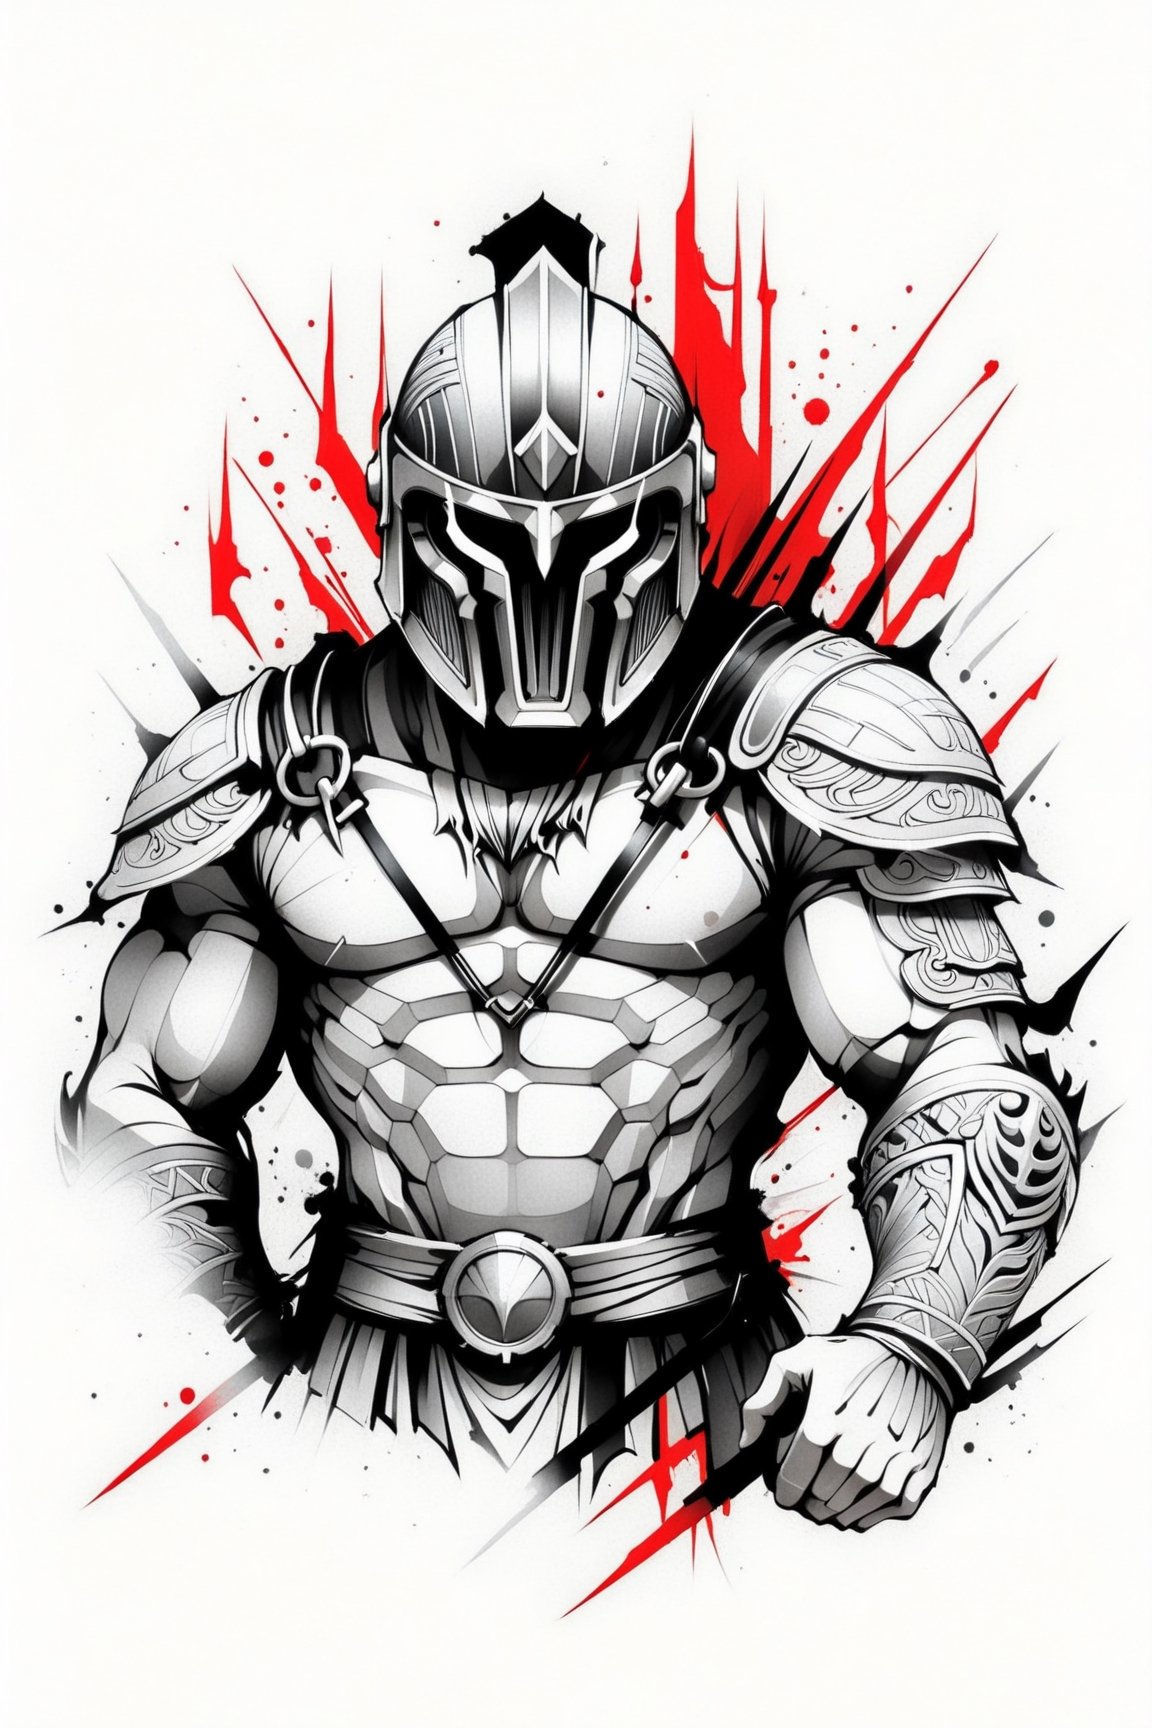 lineart tattoo design, close-up spartan soldier struggling, with helmet, bare chest, bare arms, geometric forms with red sword superimpossed, ((drawing lines)), drawing in black and withe, thick lines, filagree, realistic, silkscreen dot pattern in background, white background, monster, Leonardo Style,Pencil Draw,Fashion Illustration,Flat vector art,pencil sketch,1y0n